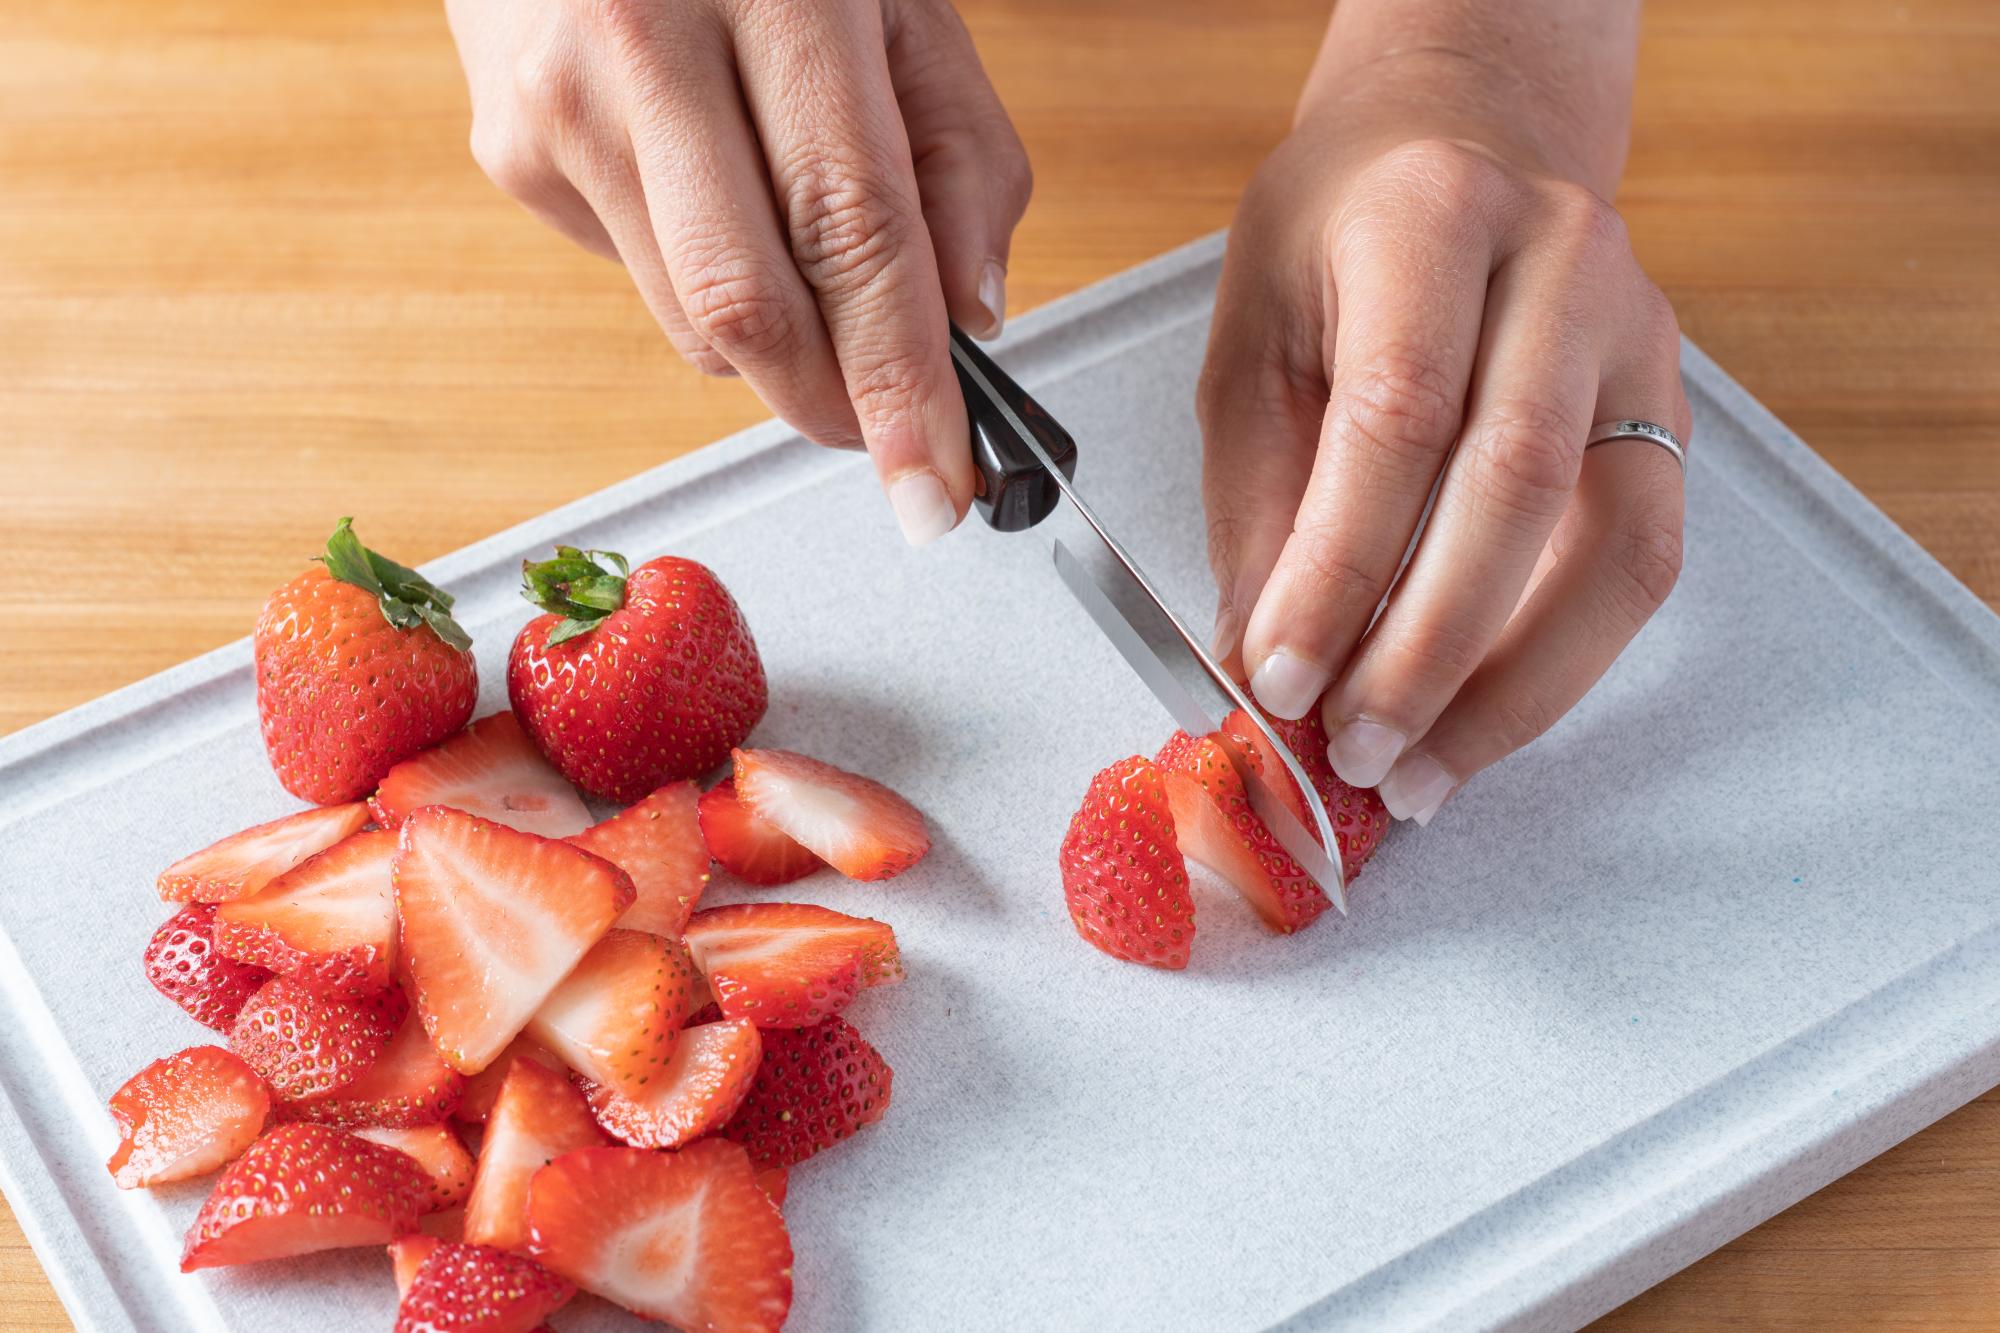 The Santoku-Style Paring knife is perfect for slicing the strawberries.